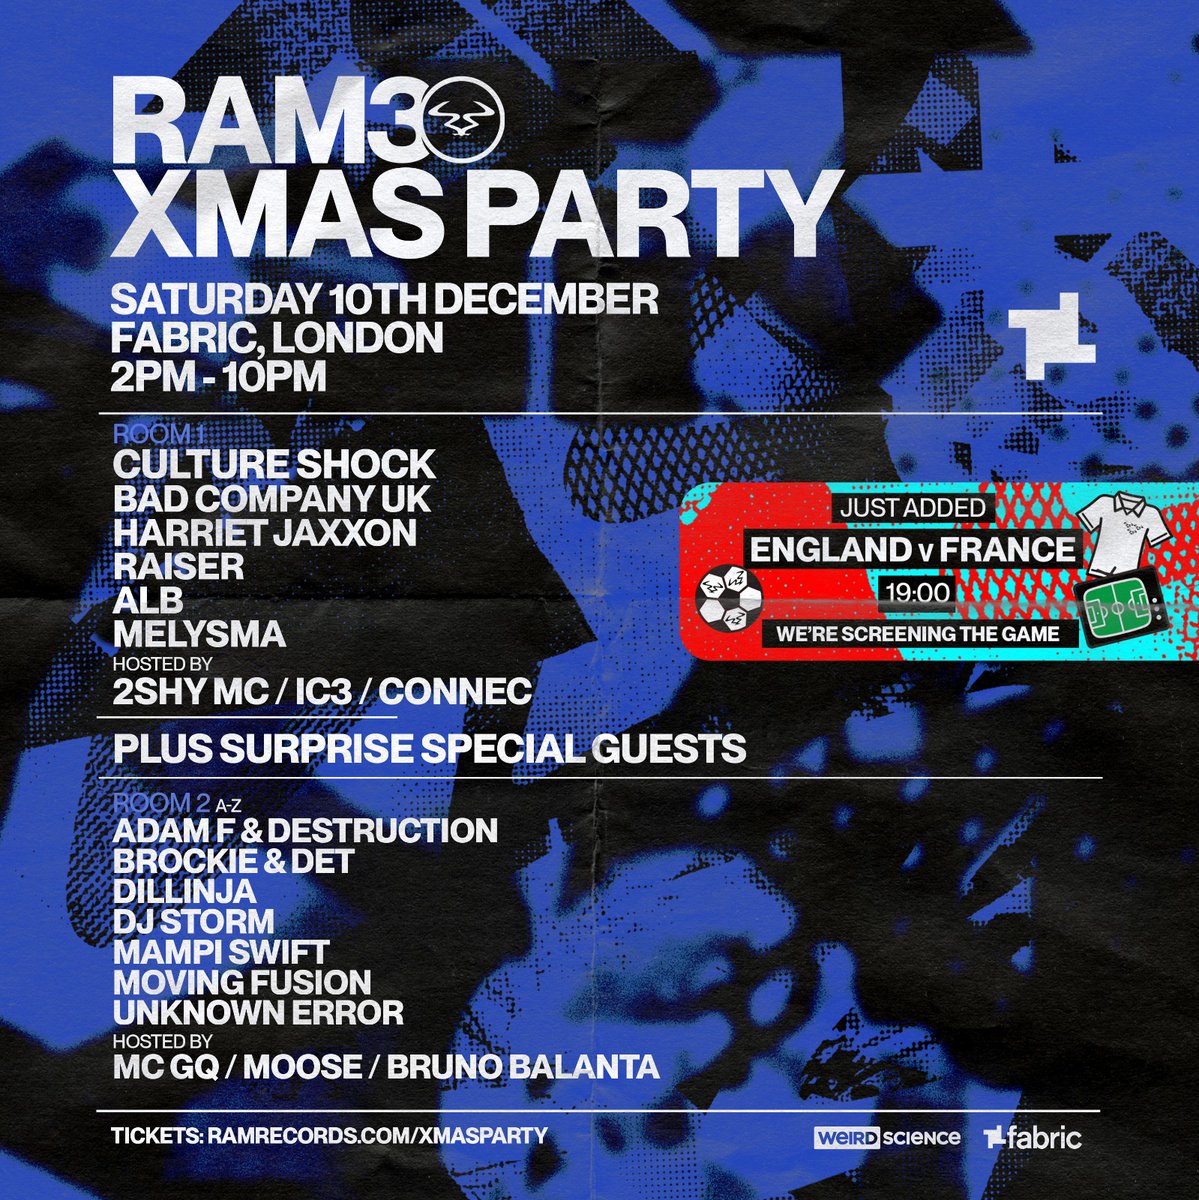 They say you shouldn't have your cake and eat it, but we totally disagree. So in collaboration with fabric, we will be going ahead as planned this Saturday and we will also be screening the football as part of the event. Let's do this! 🤩 ramrecords.com/xmasparty